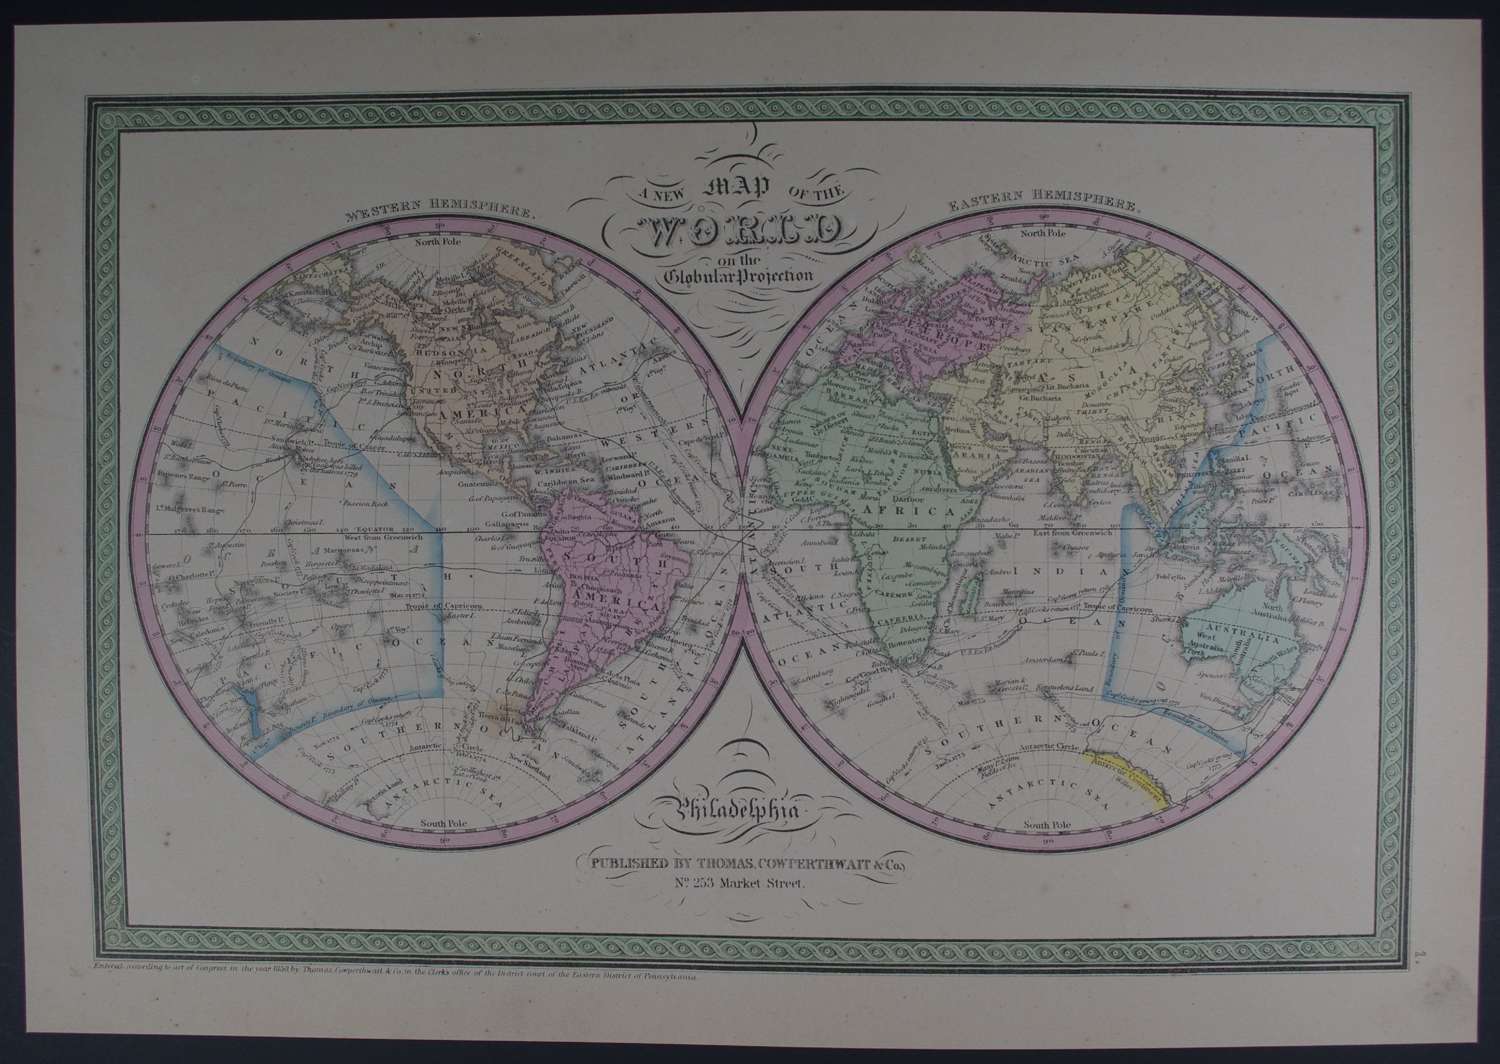 A New Map of the World... by Thomas Cowperthwait & Co